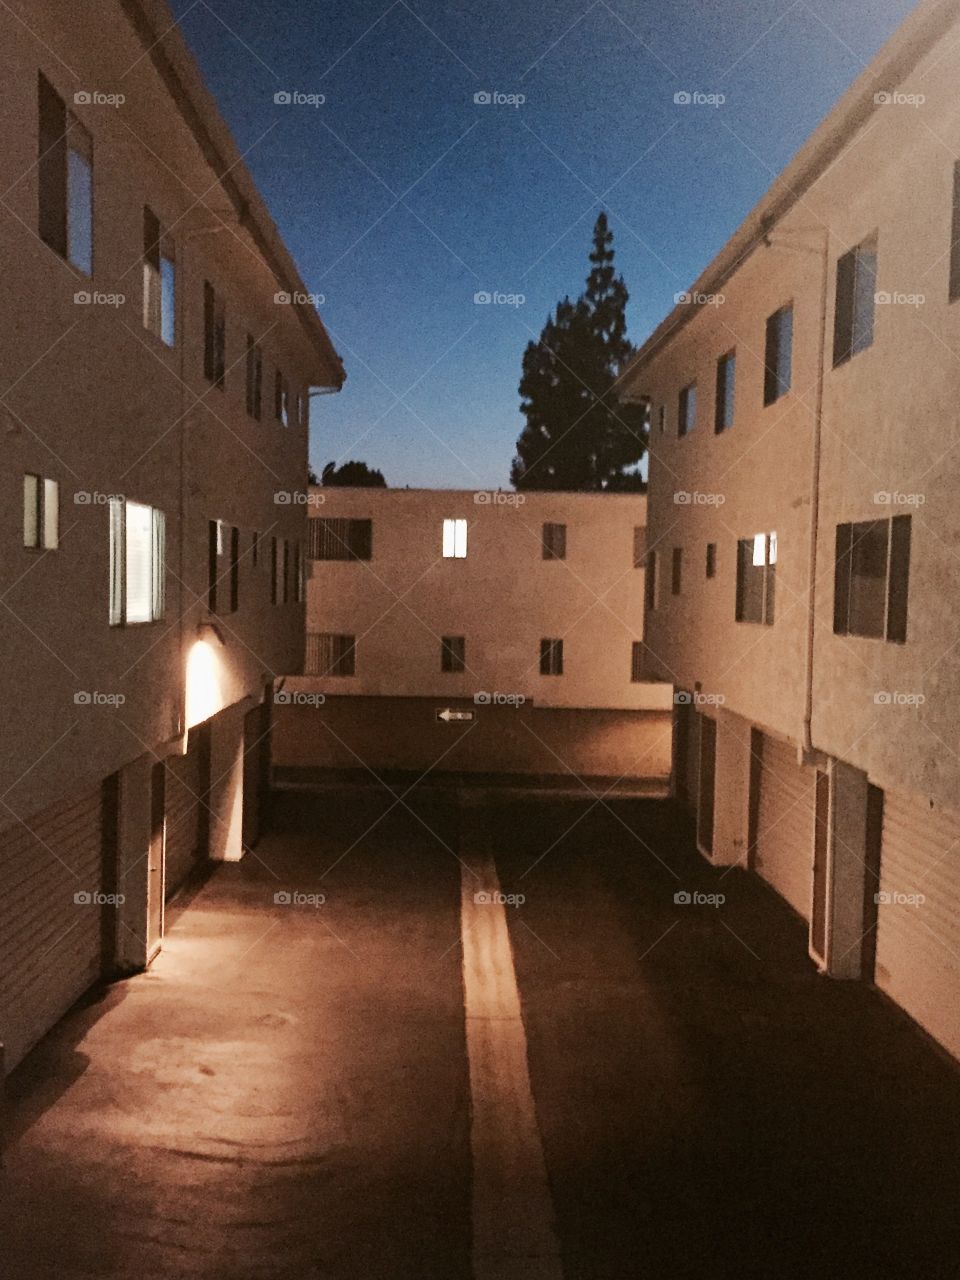 Apartments in the Night 